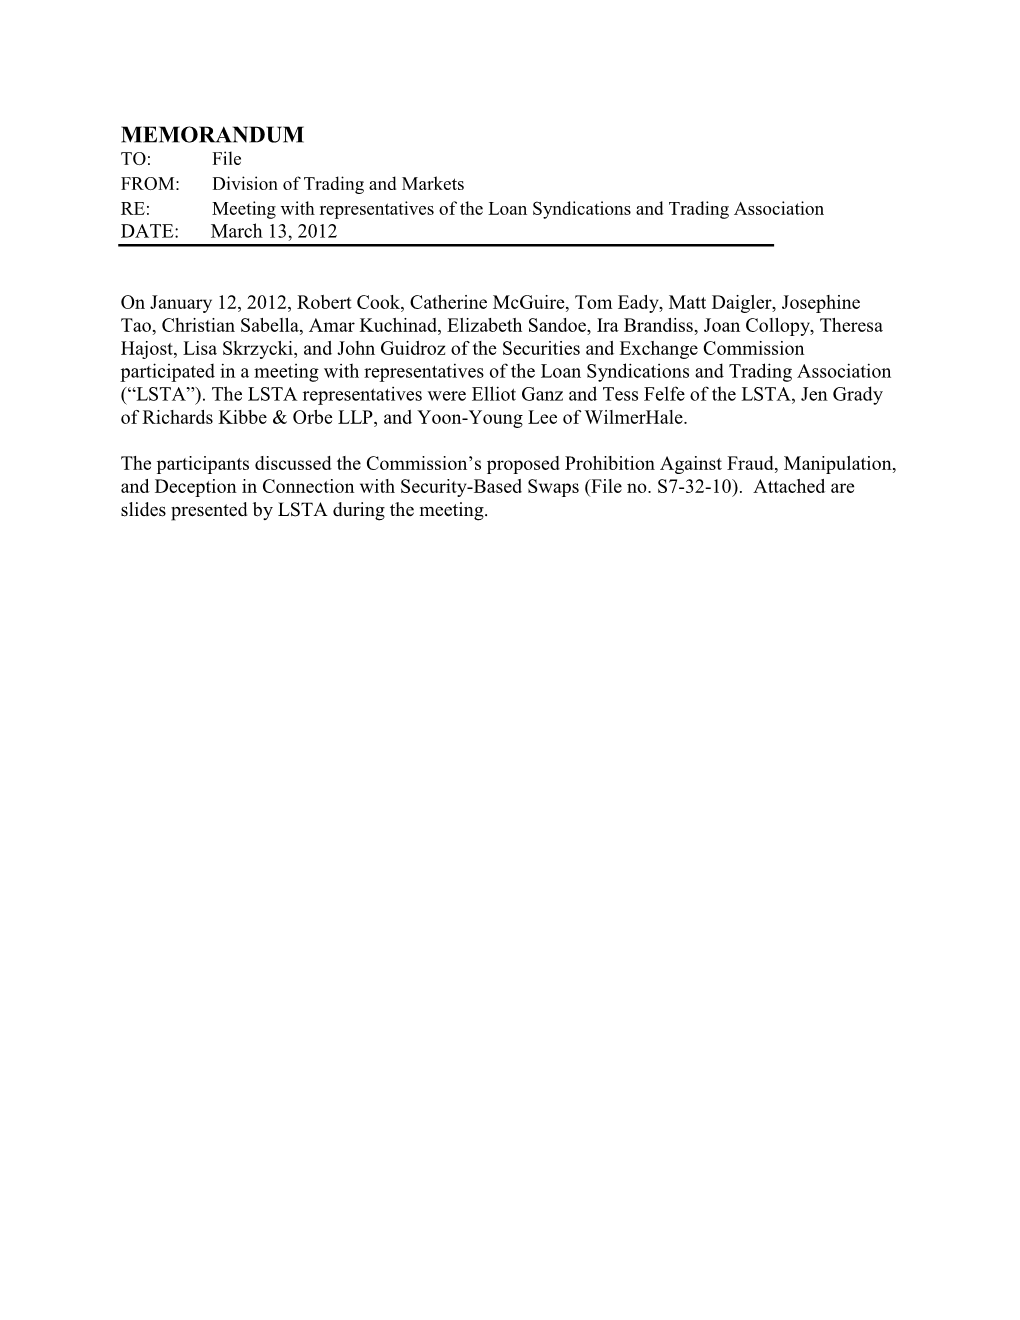 MEMORANDUM TO: File FROM: Division of Trading and Markets RE: Meeting with Representatives of the Loan Syndications and Trading Association DATE: March 13, 2012